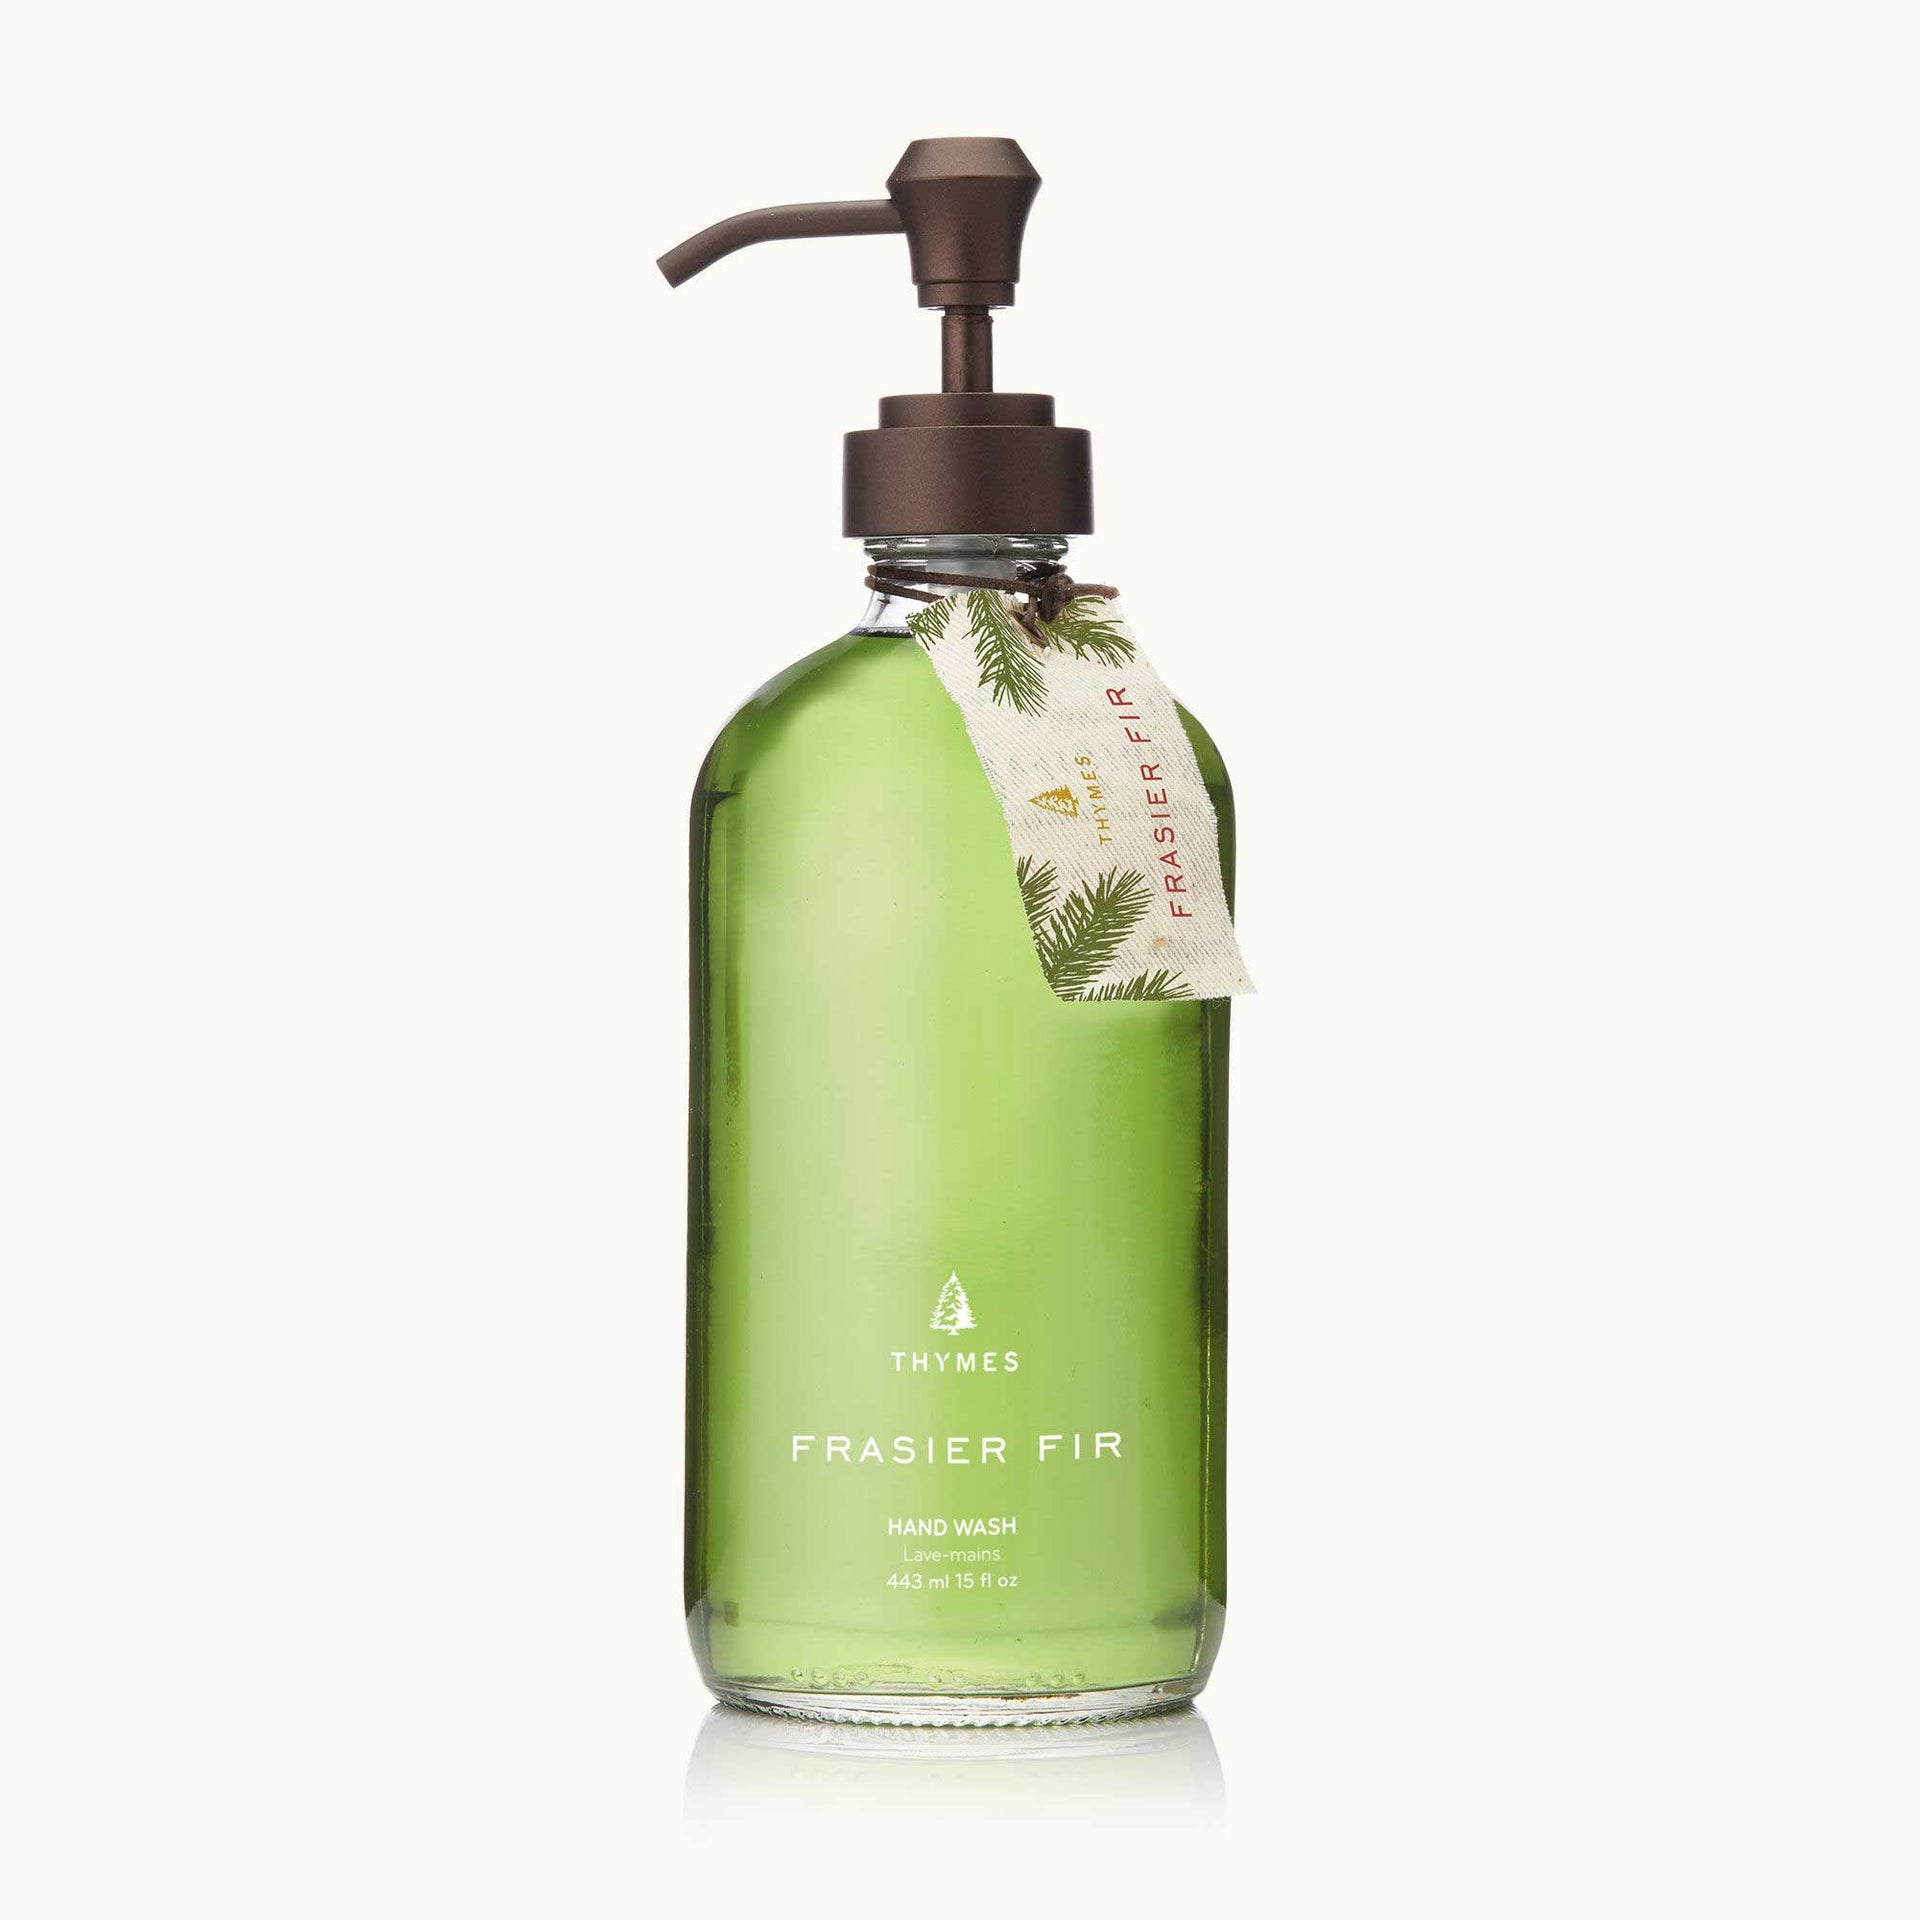 Thymes Frasier Fir All Purpose Cleaning Concentrate 16oz – The Laundry  Evangelist